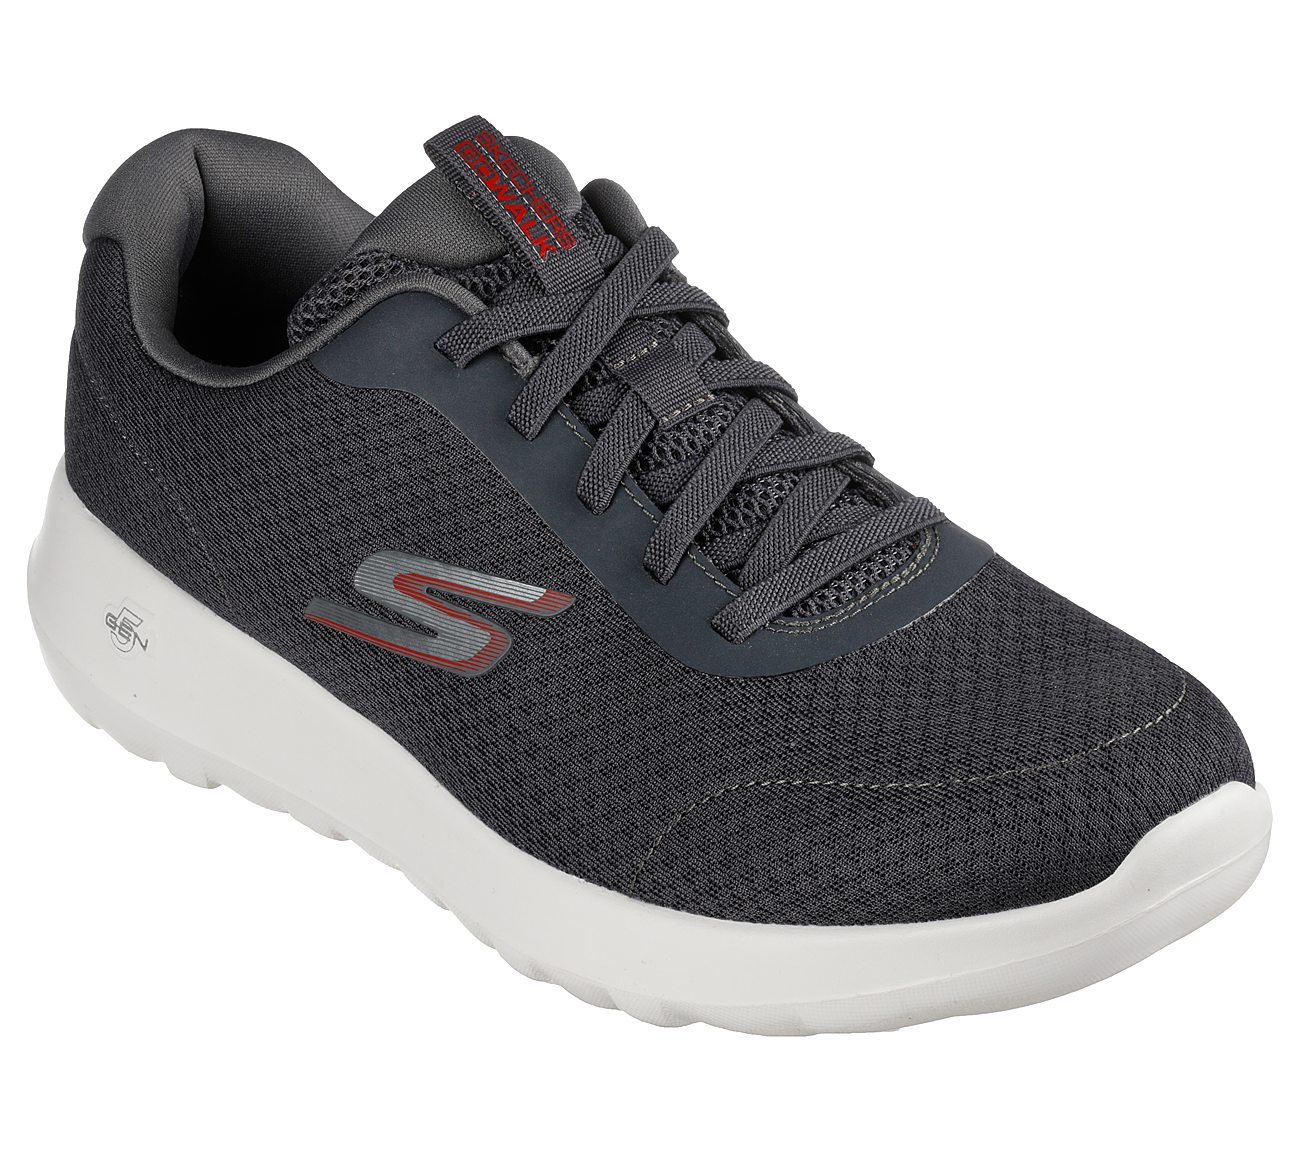 Skechers Charcoal/Red Go Walk Max Midshore Lace Up Shoes For Men ...